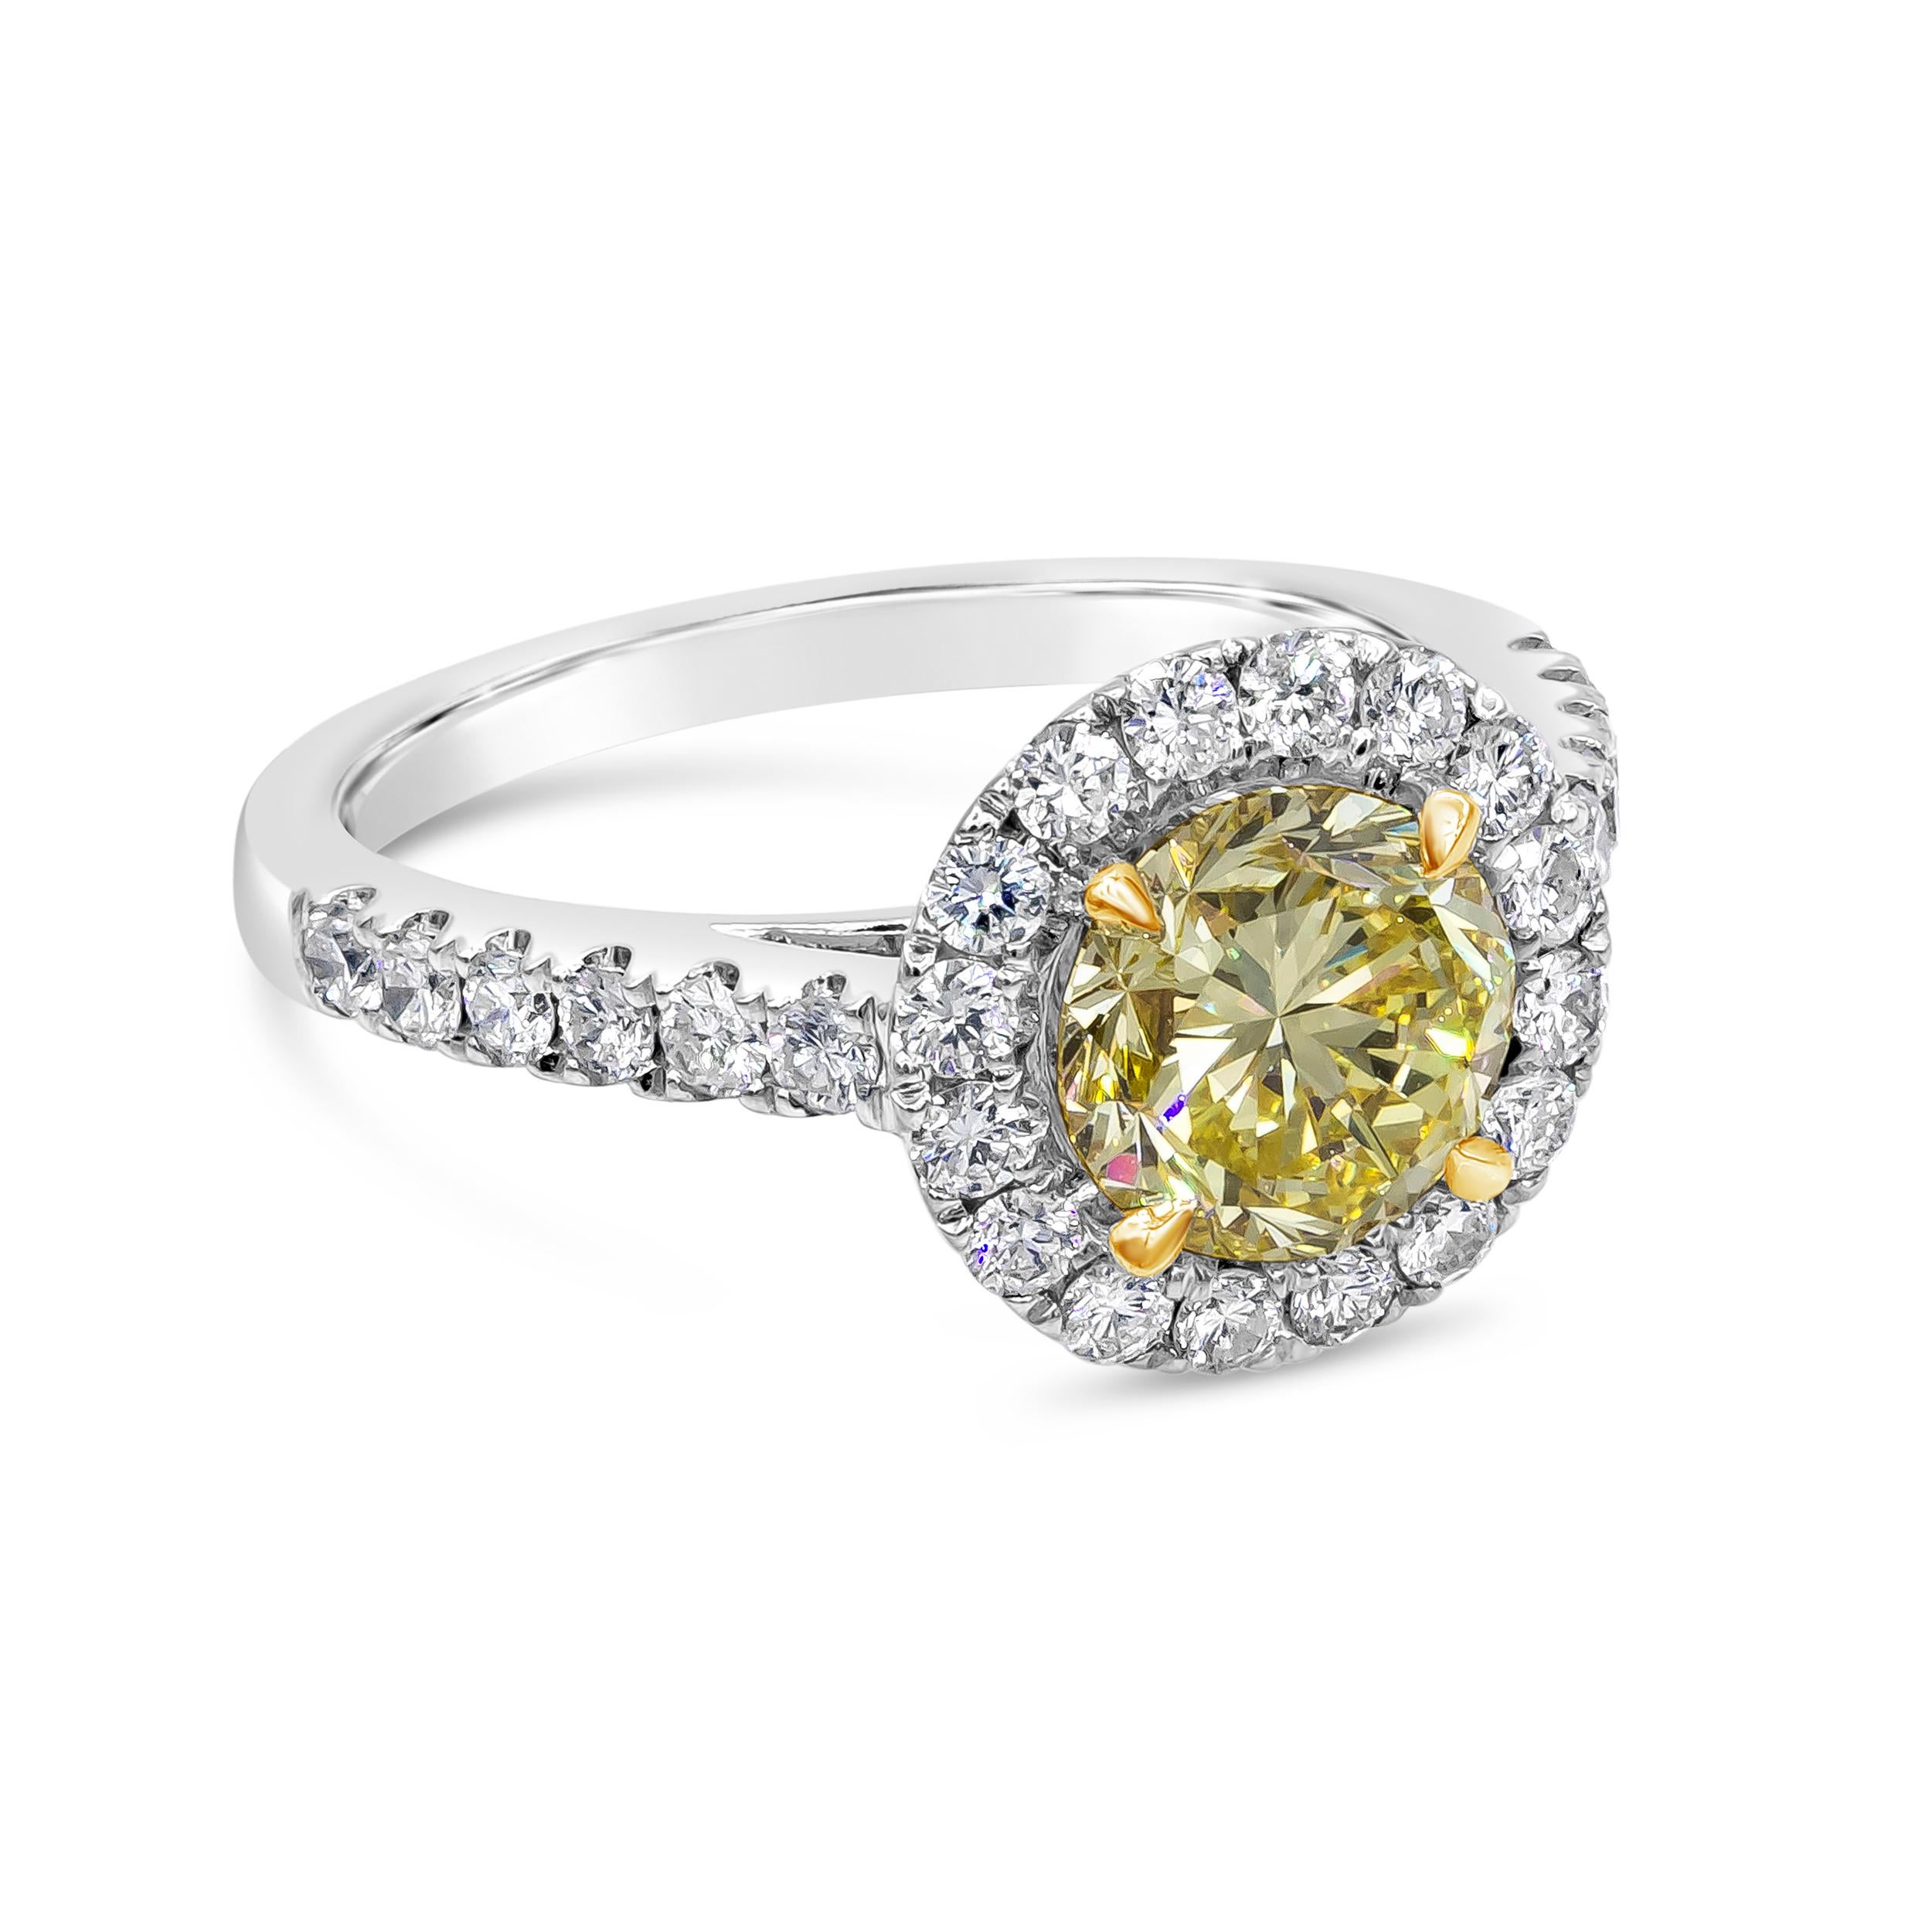 A color-rich engagement ring showcasing a 1.51 carats brilliant round cut diamond certified by GIA as Fancy Intense Yellow color and SI2 in clarity. Surrounded by a single row of round brilliant diamonds in halo pave half eternity setting. Accent